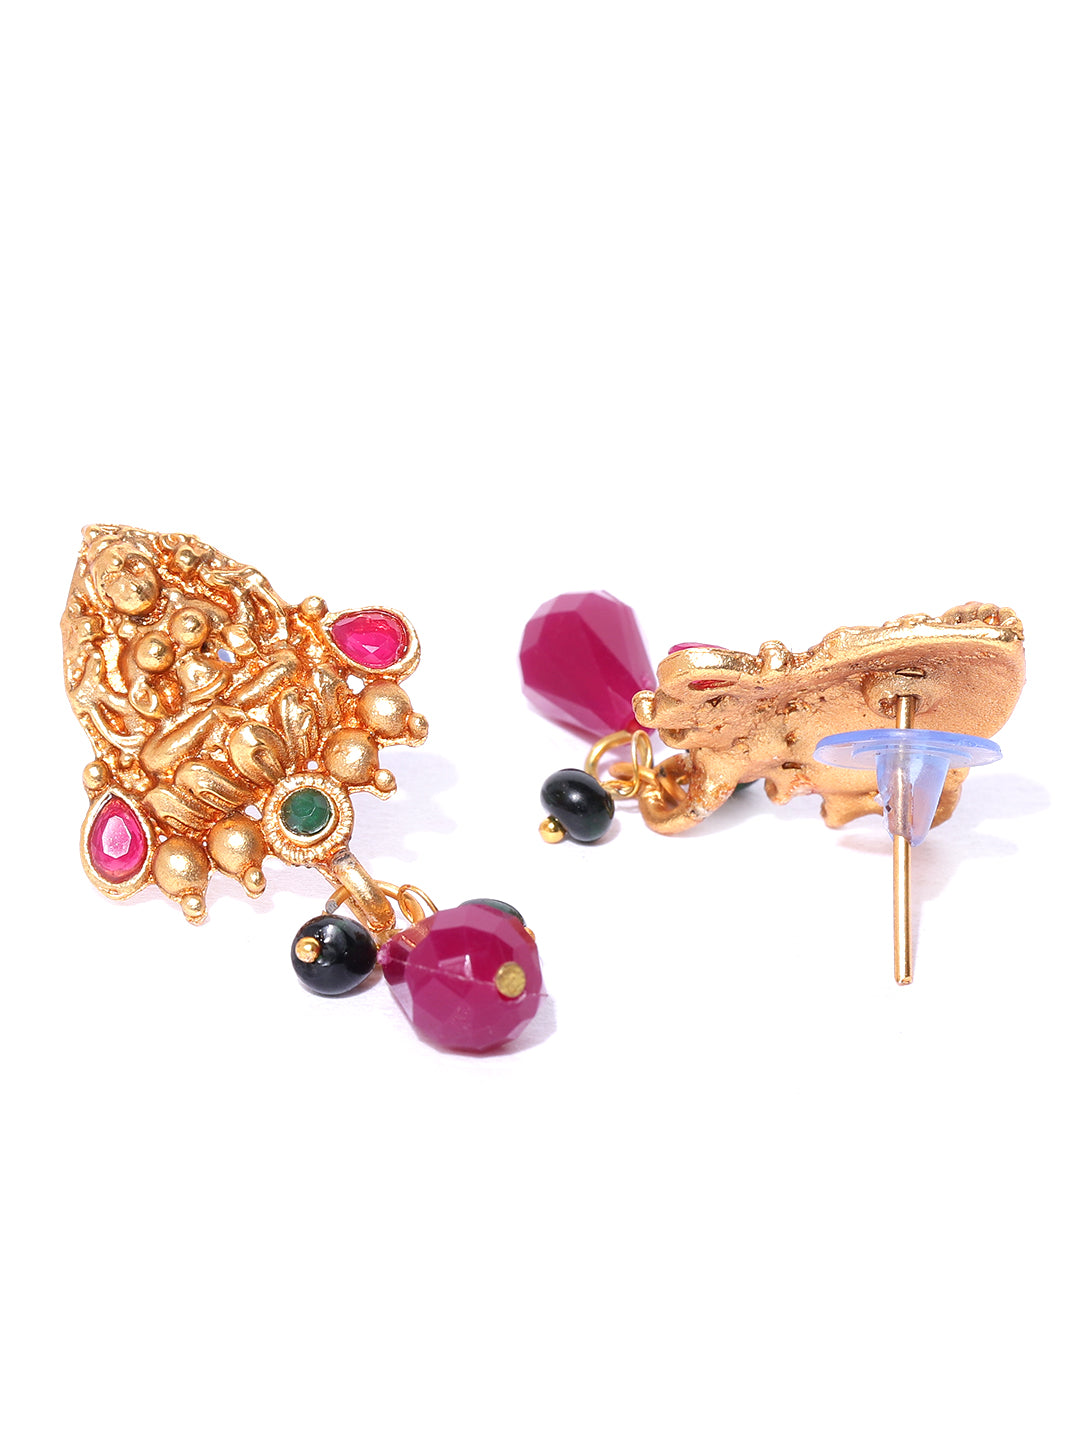 Ruby Emerlad Gold Plated Temple Jewellery Set